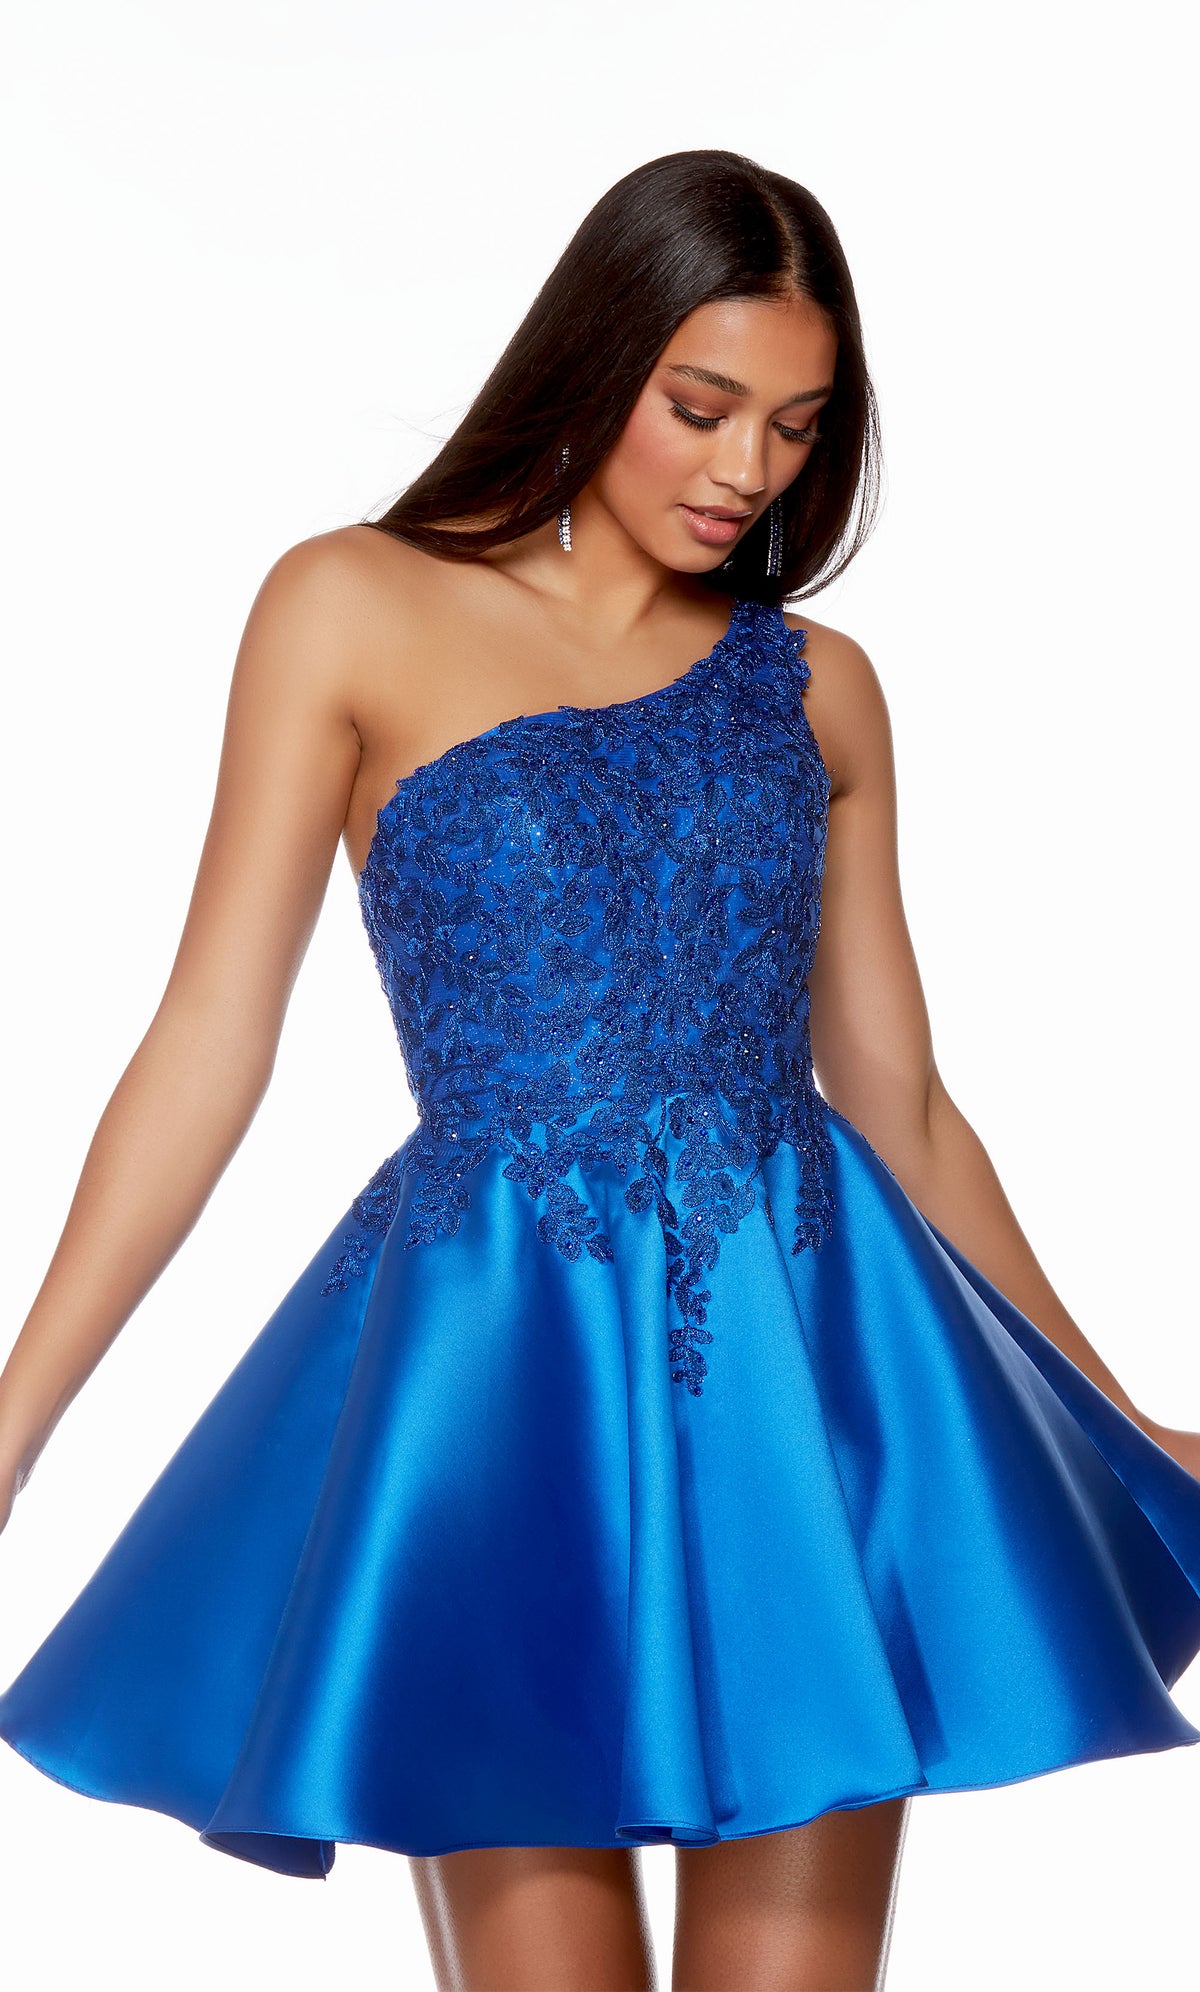 A royal blue, one-shoulder short formal dress with a delicate lace bodice and a flared A-line skirt.